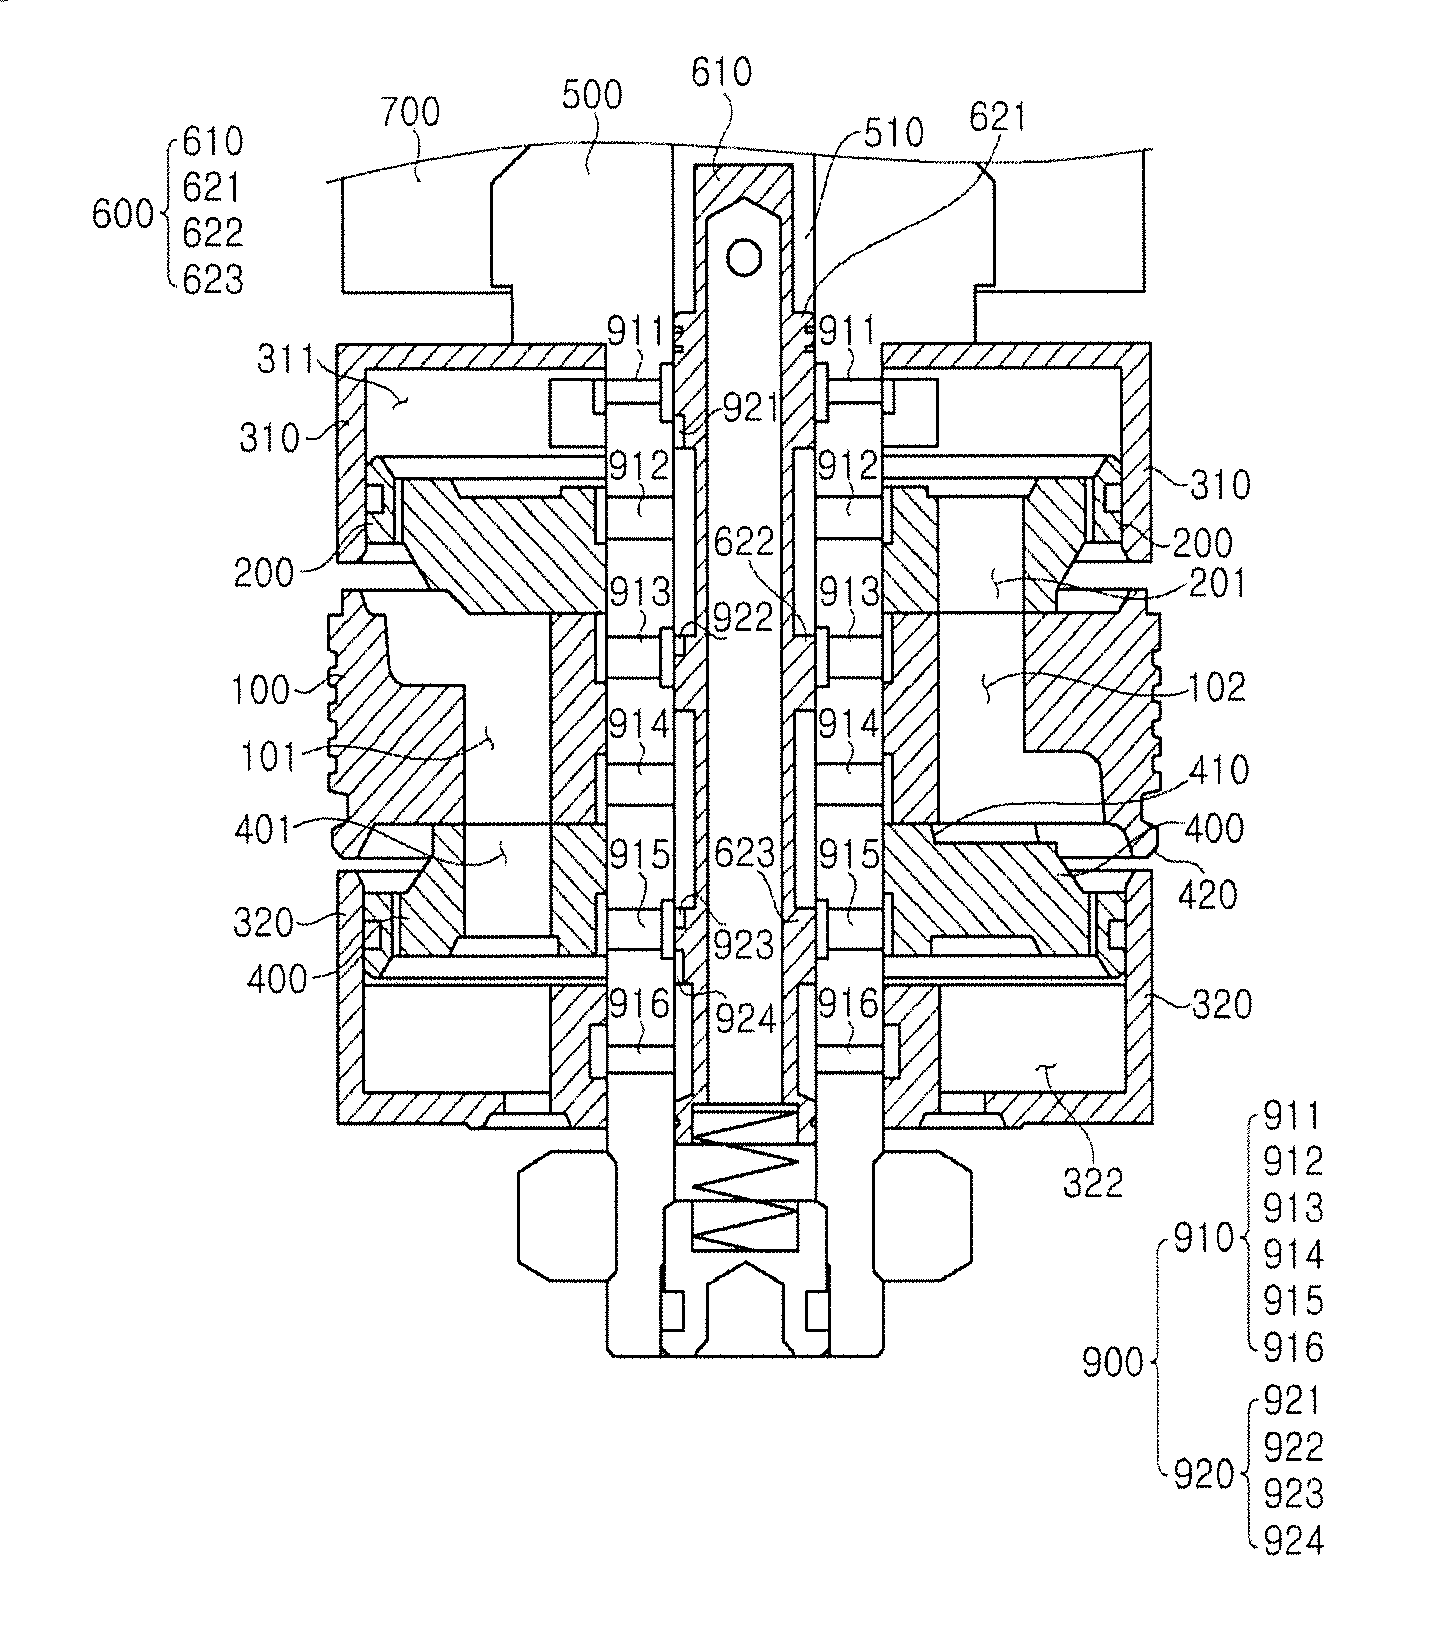 Electronically controlled internal damper